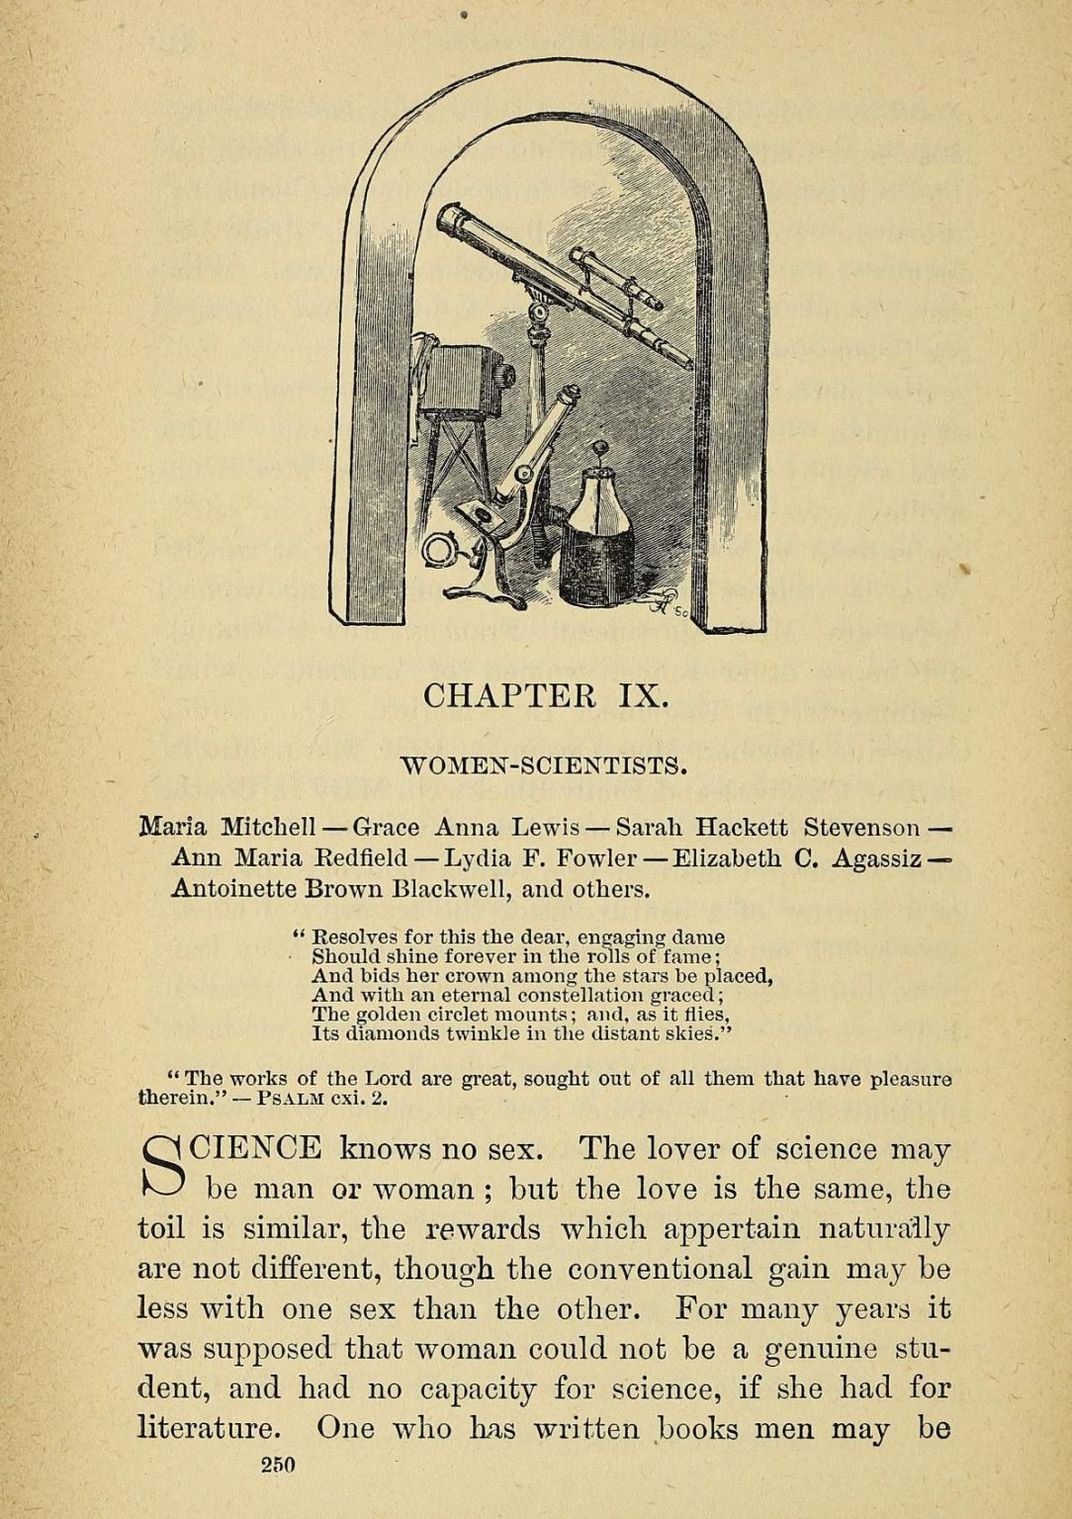 Chapter illustration with 19th century telescope"